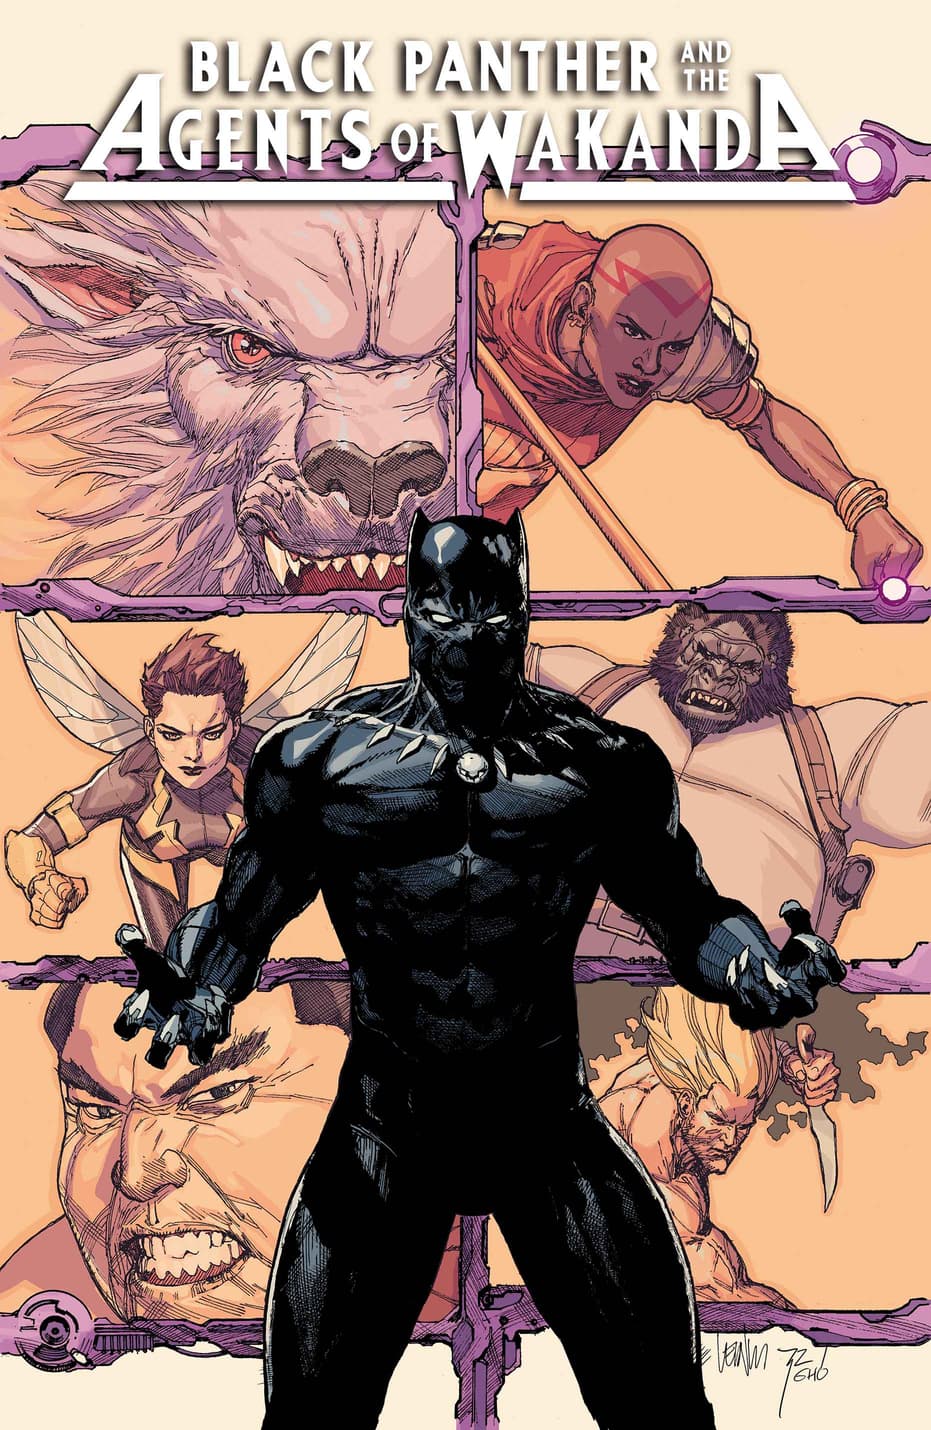 BLACK PANTHER AND THE AGENTS OF WAKANDA